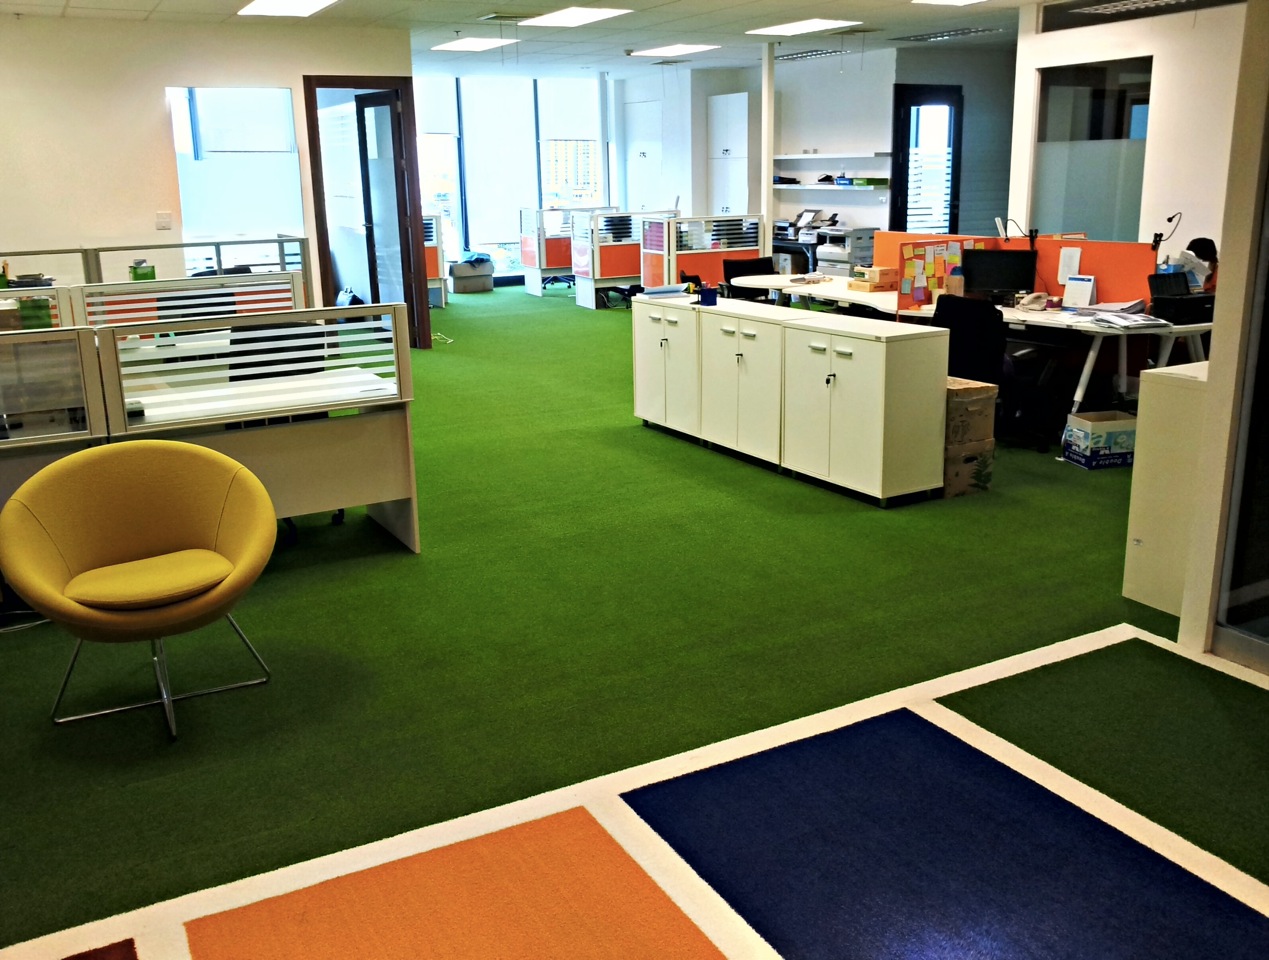 SYNTHETIC GRASS FLOORING IN OFFICE